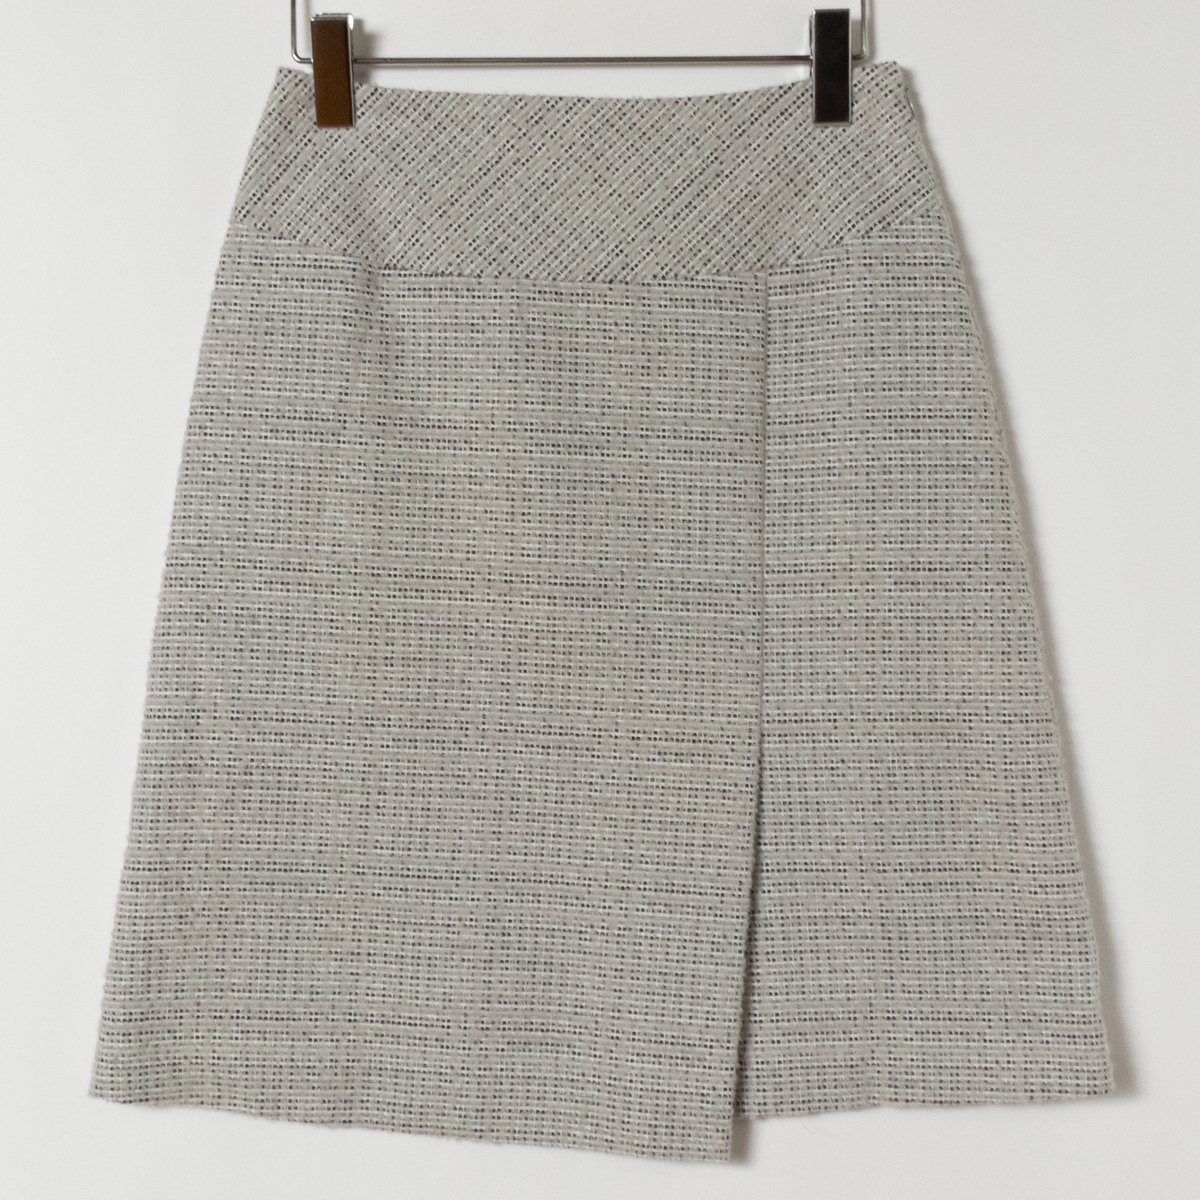 UNTITLED Untitled wool skirt trapezoid skirt knee height gray black 1 S lady's box check clean . on goods formal 